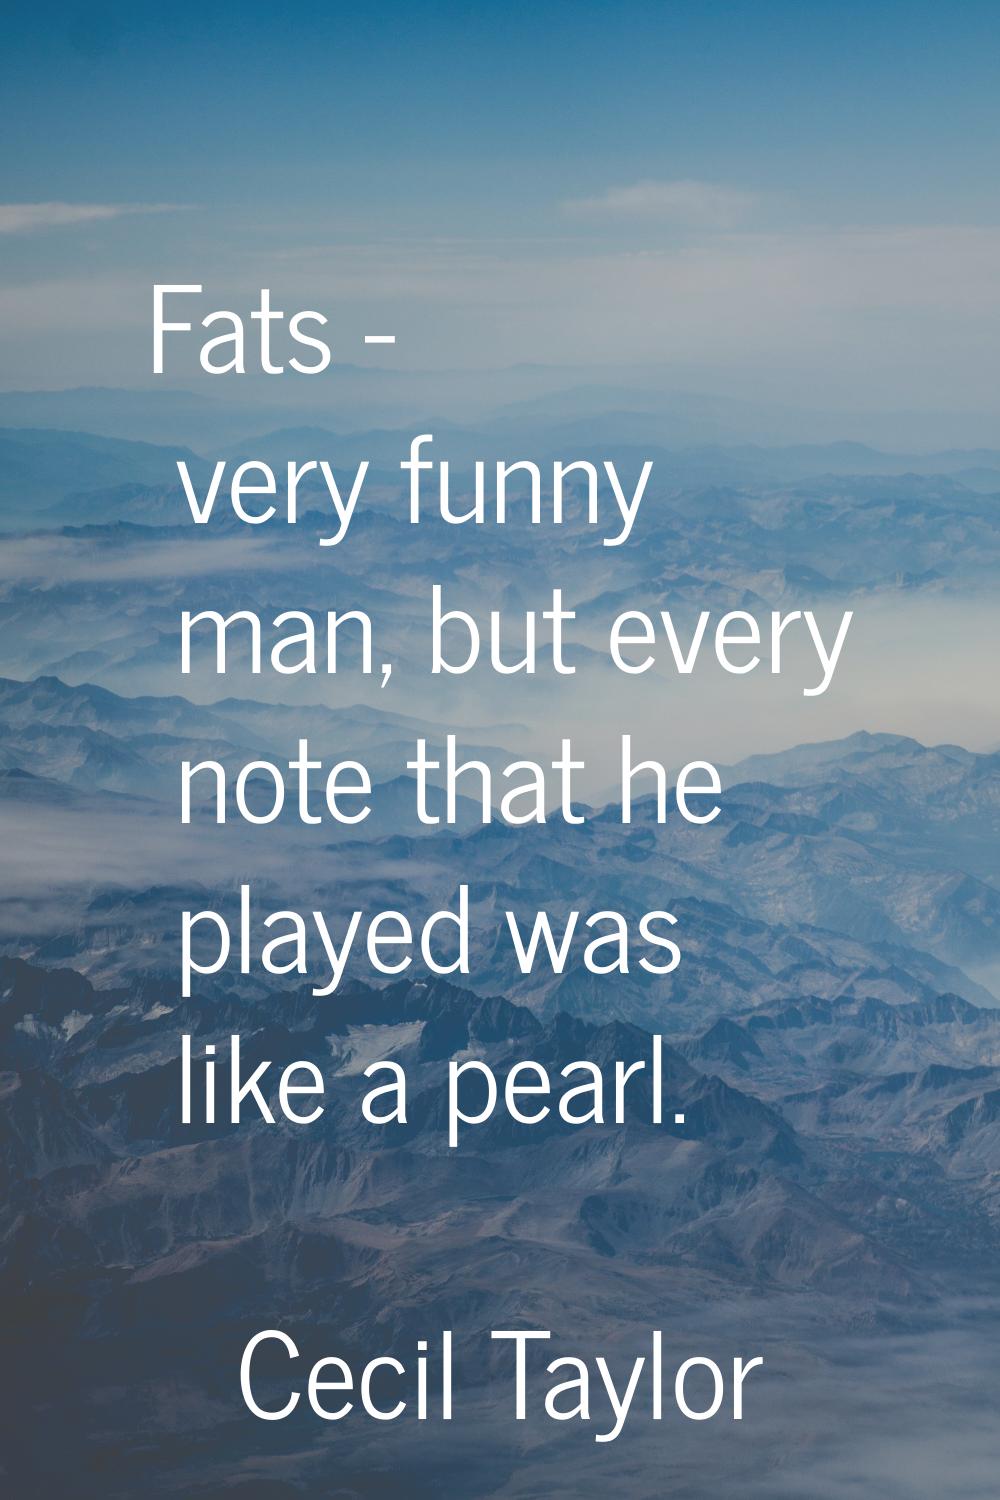 Fats - very funny man, but every note that he played was like a pearl.